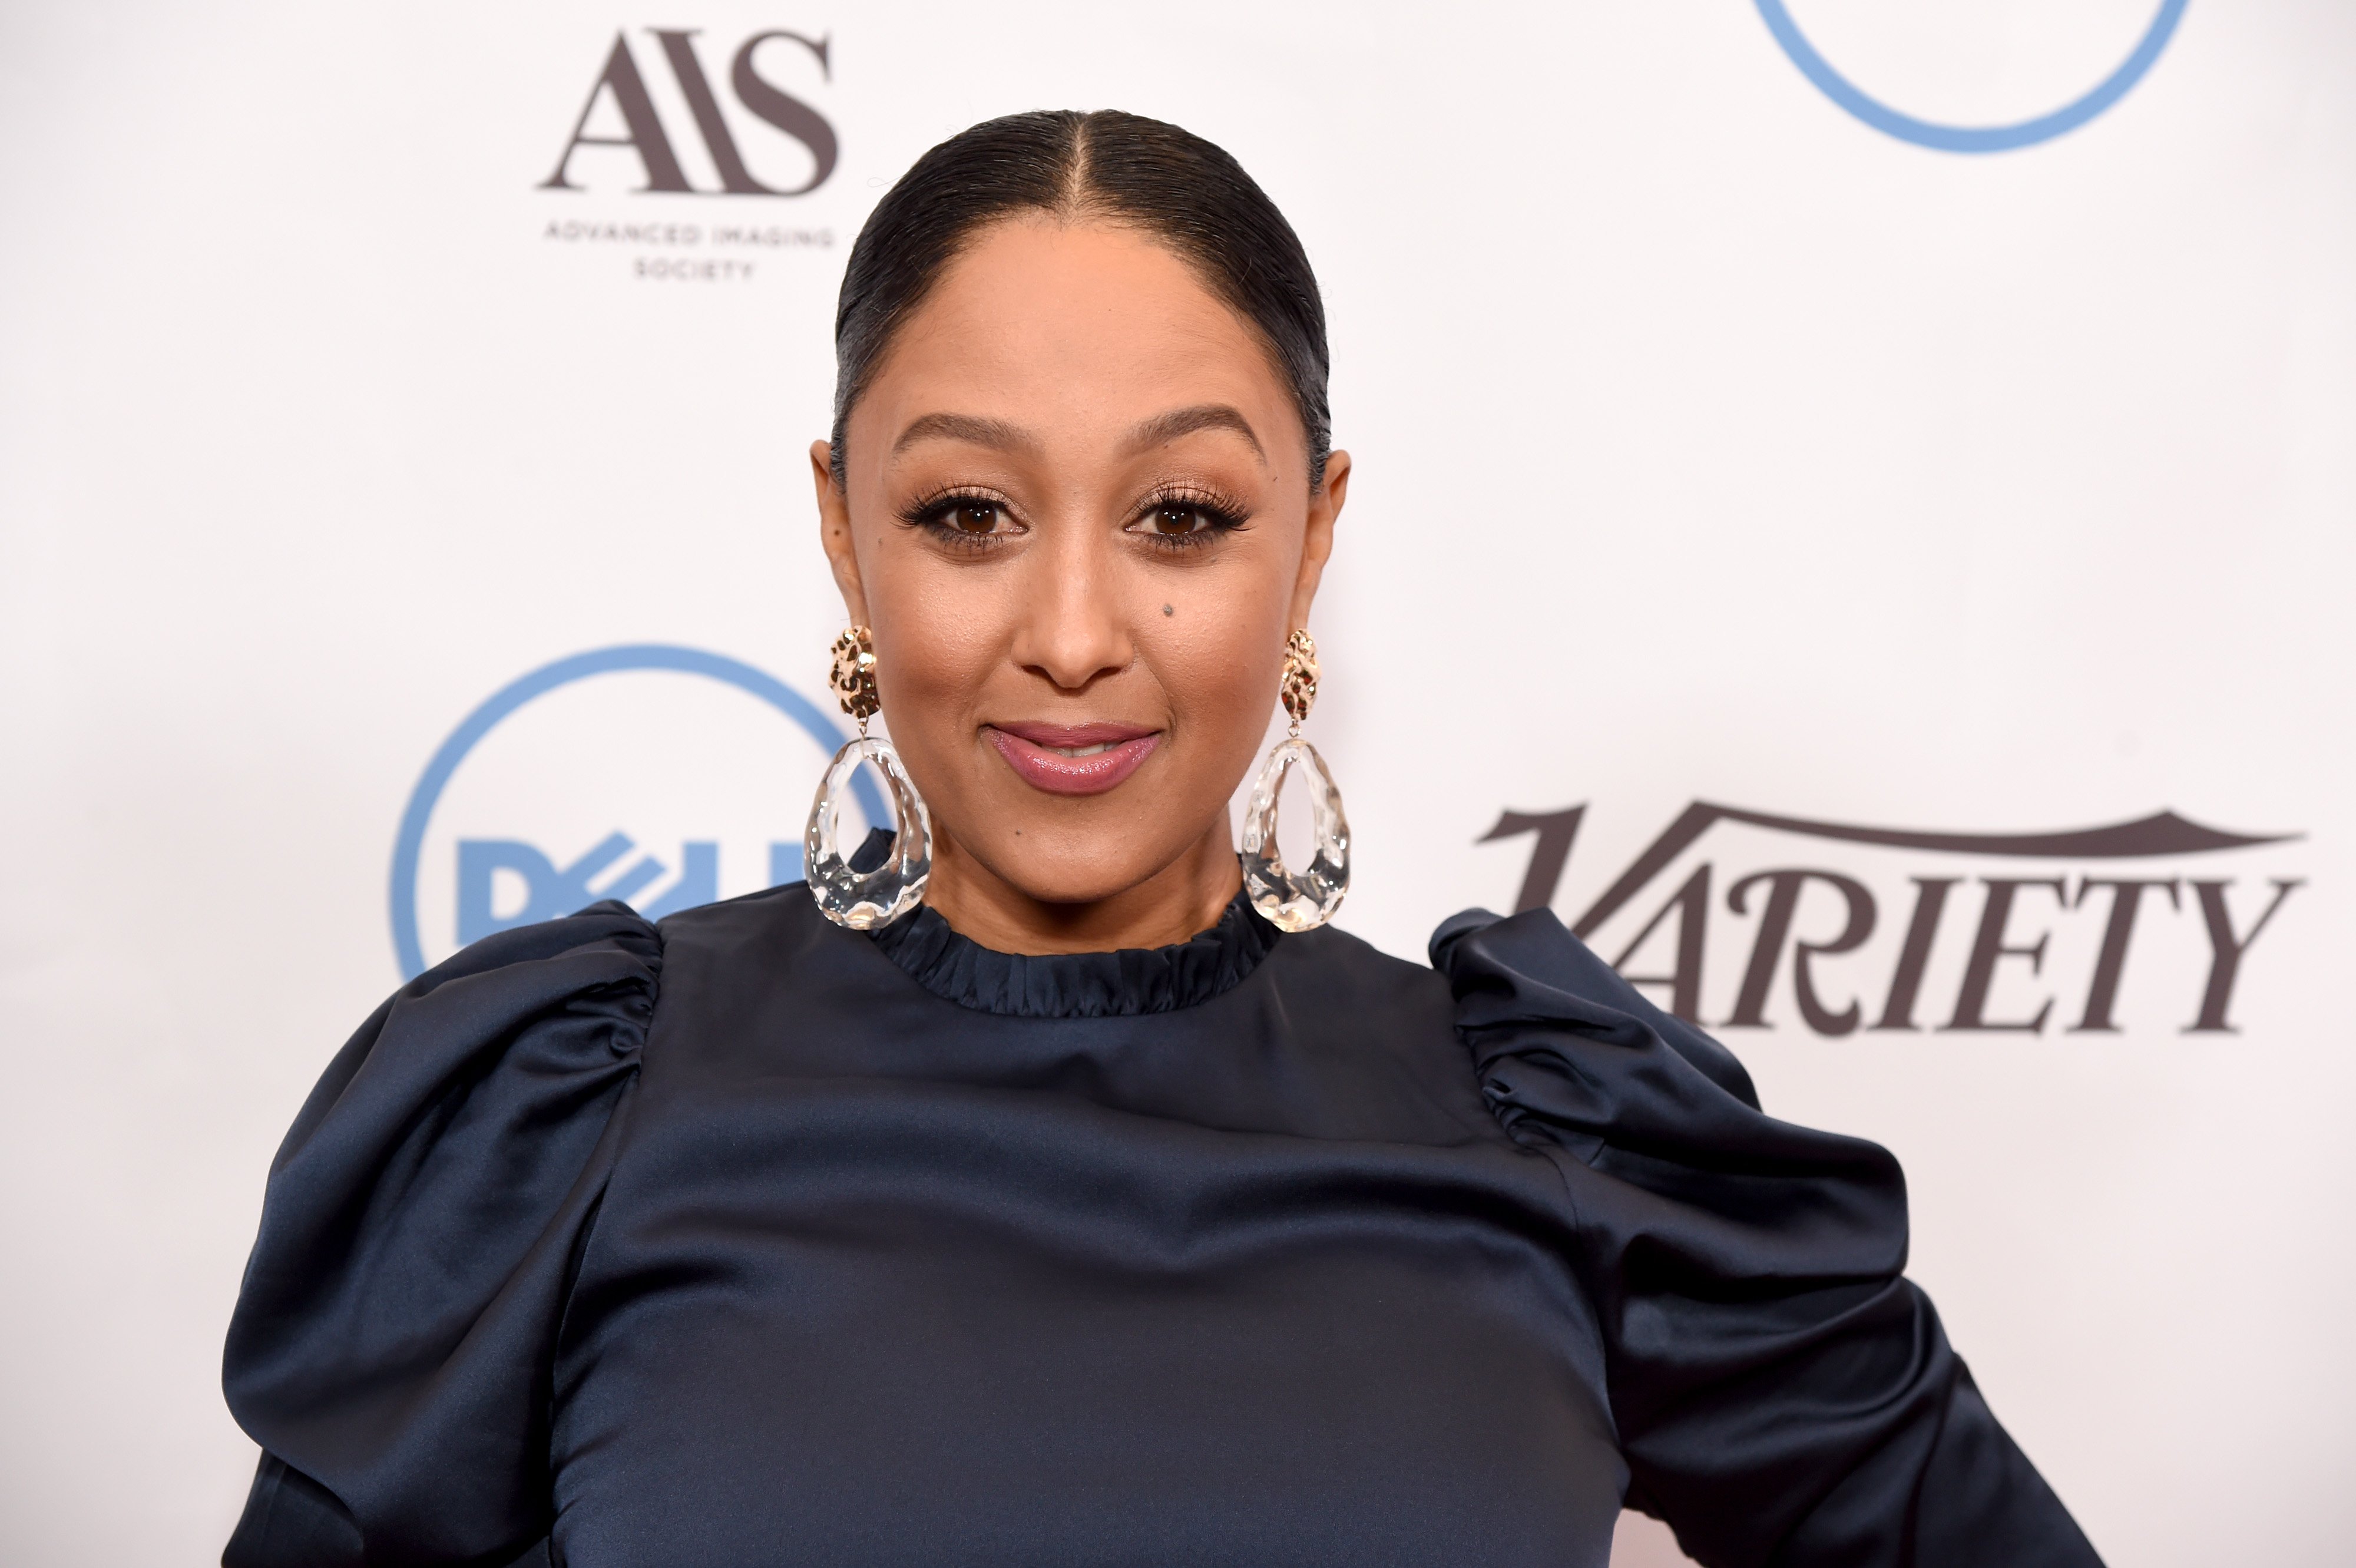 Tamera Mowry at an event